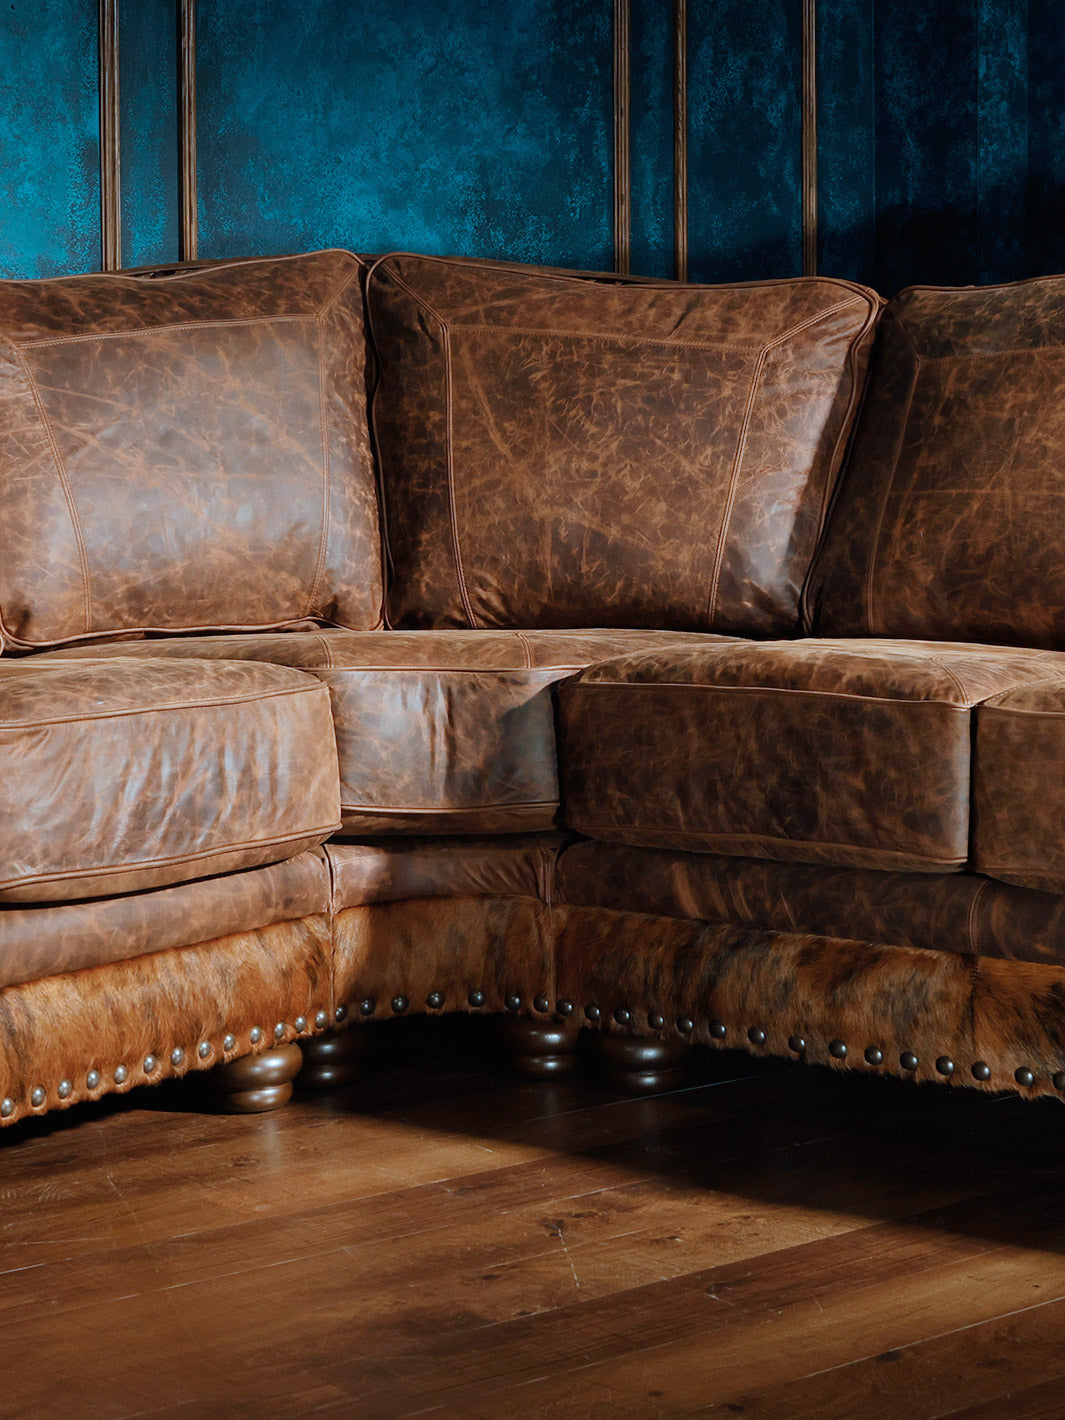 Brown Western Leather Sectional Sofa